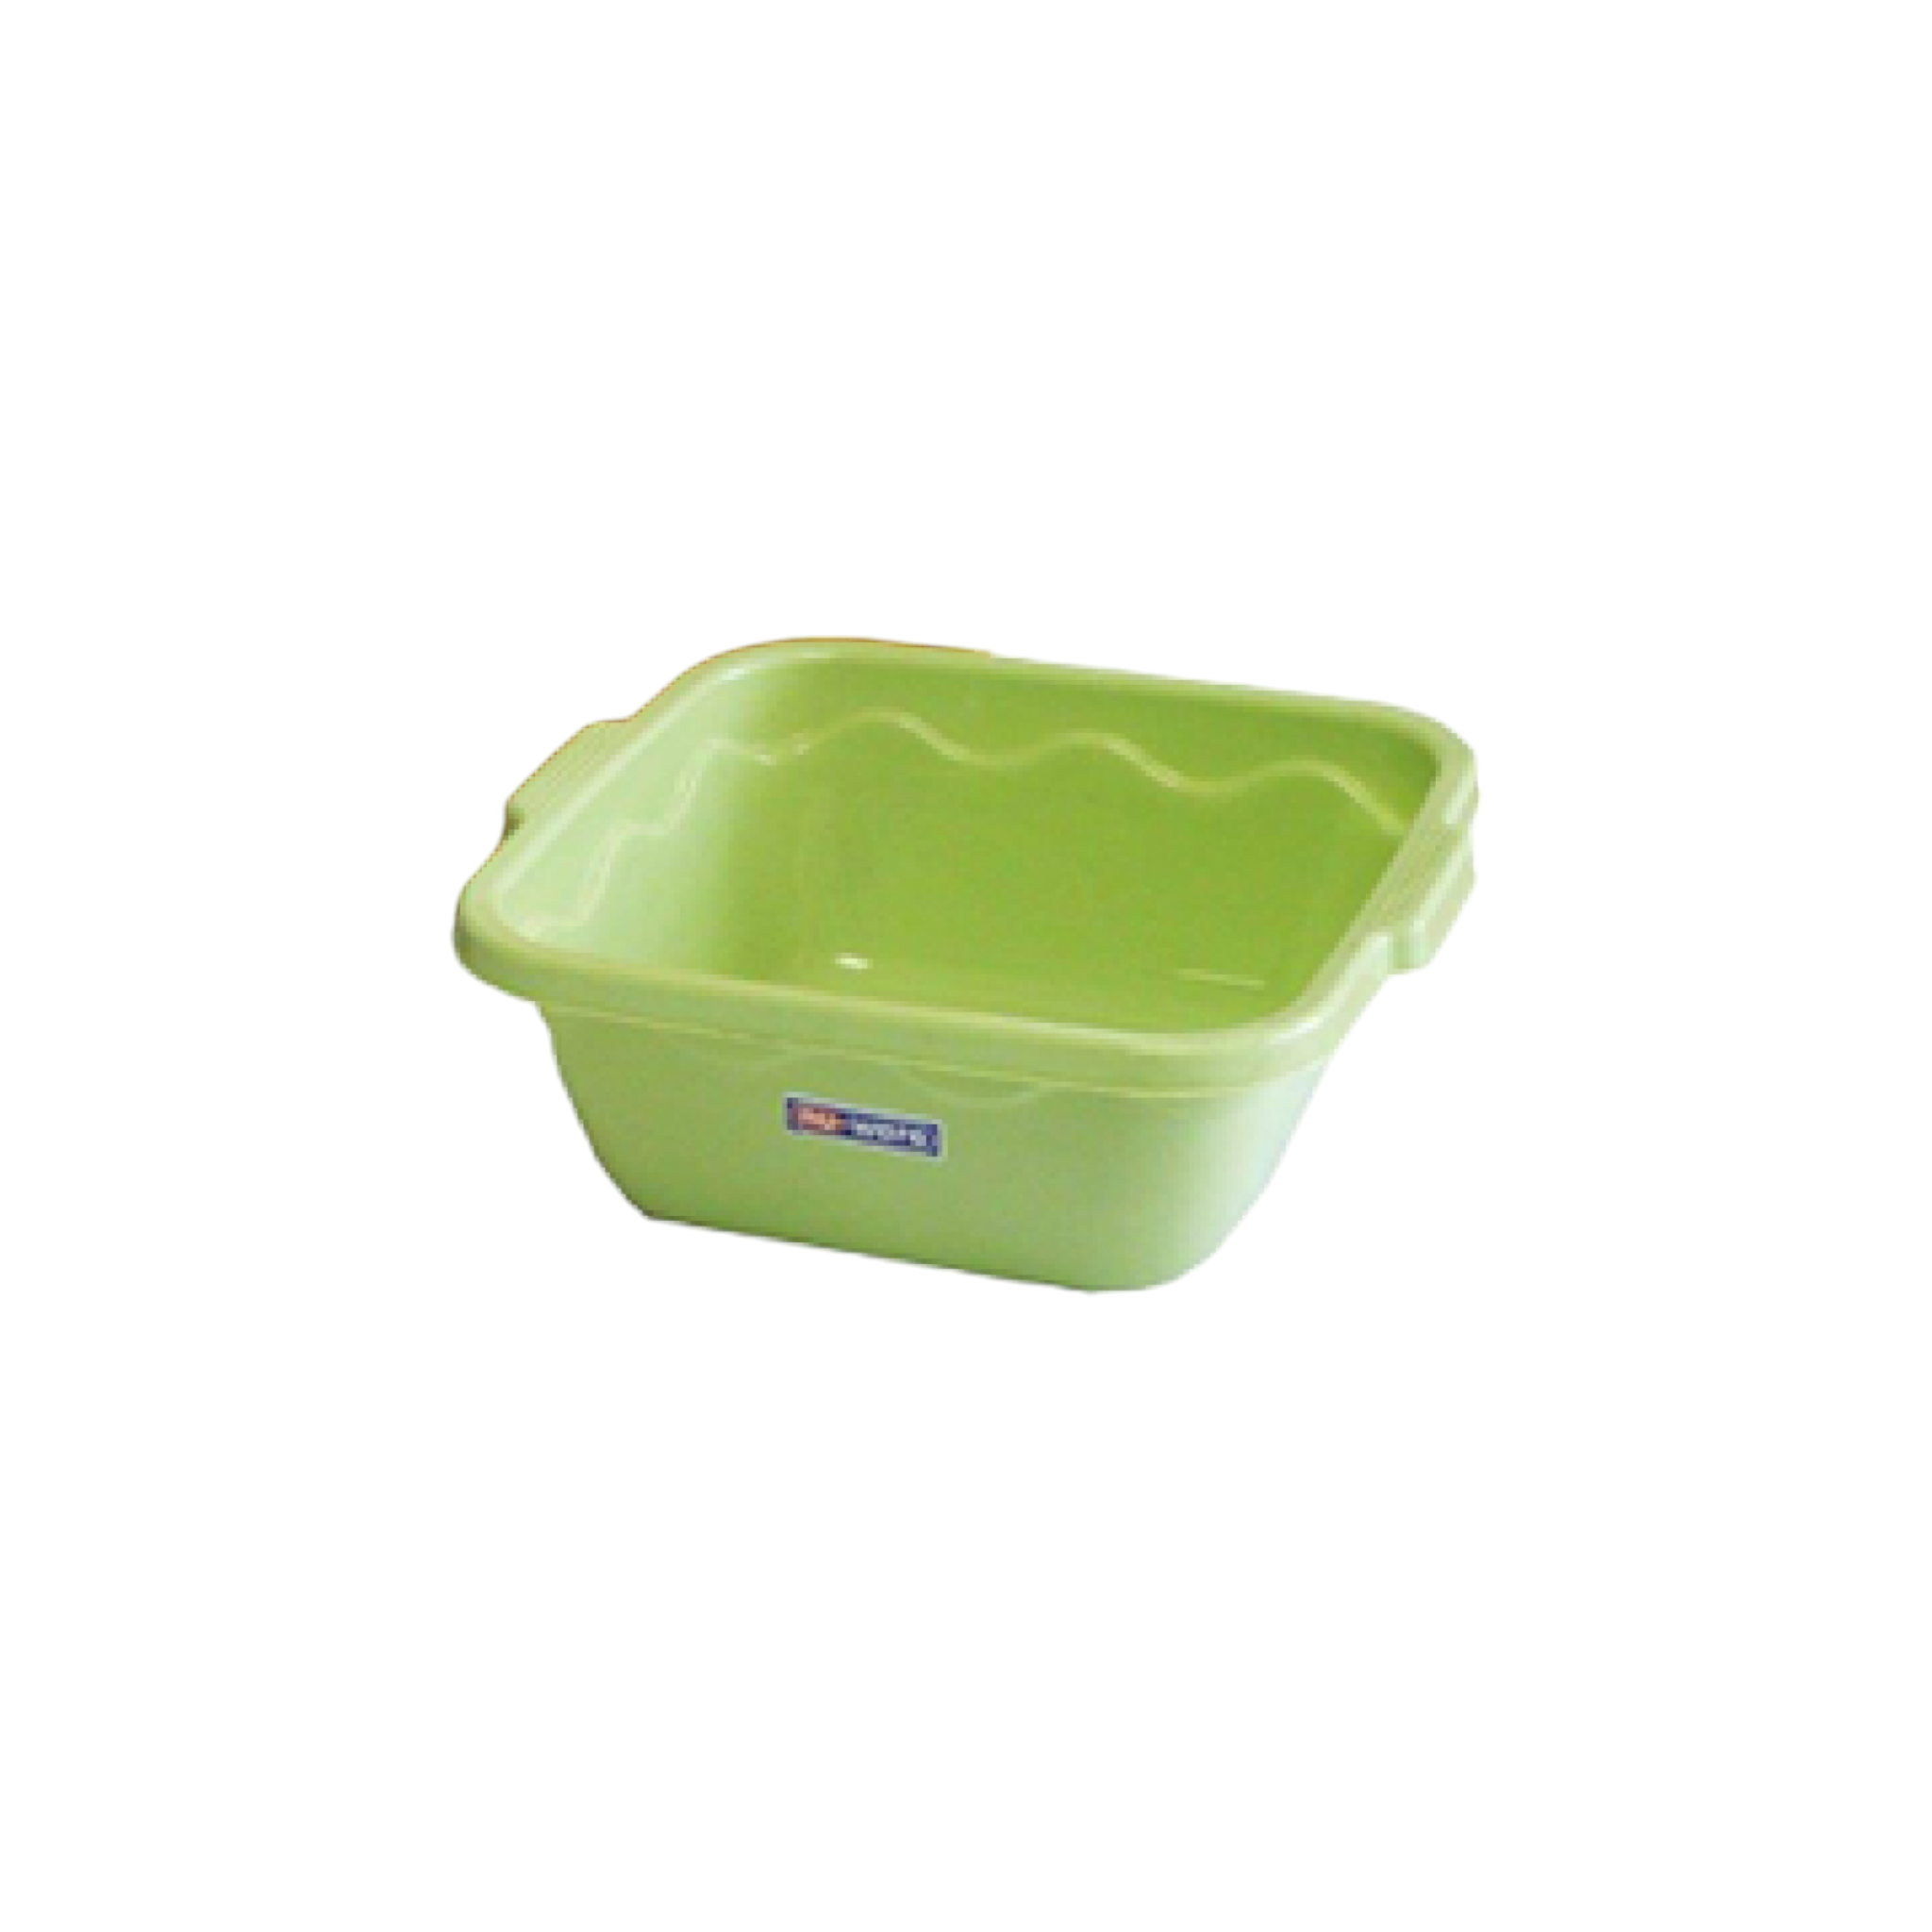 25cm Square Bowl Plastic Basin Recycled Nu Ware